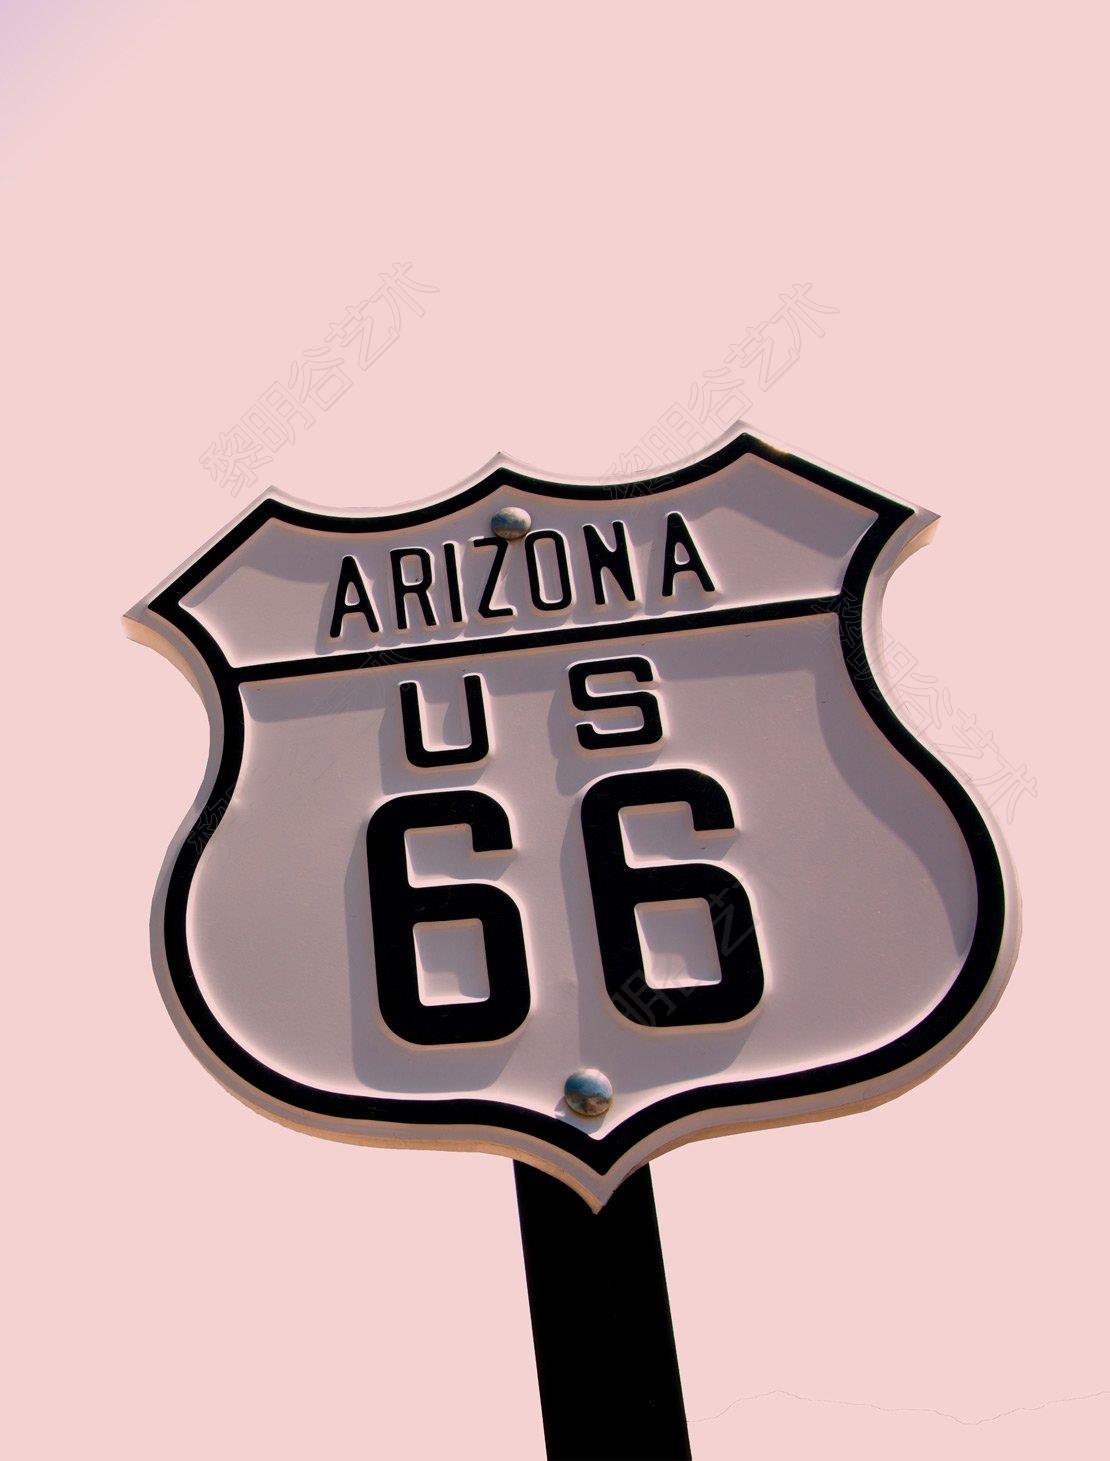 Arizona 66 - Route 66 Sign on Pink